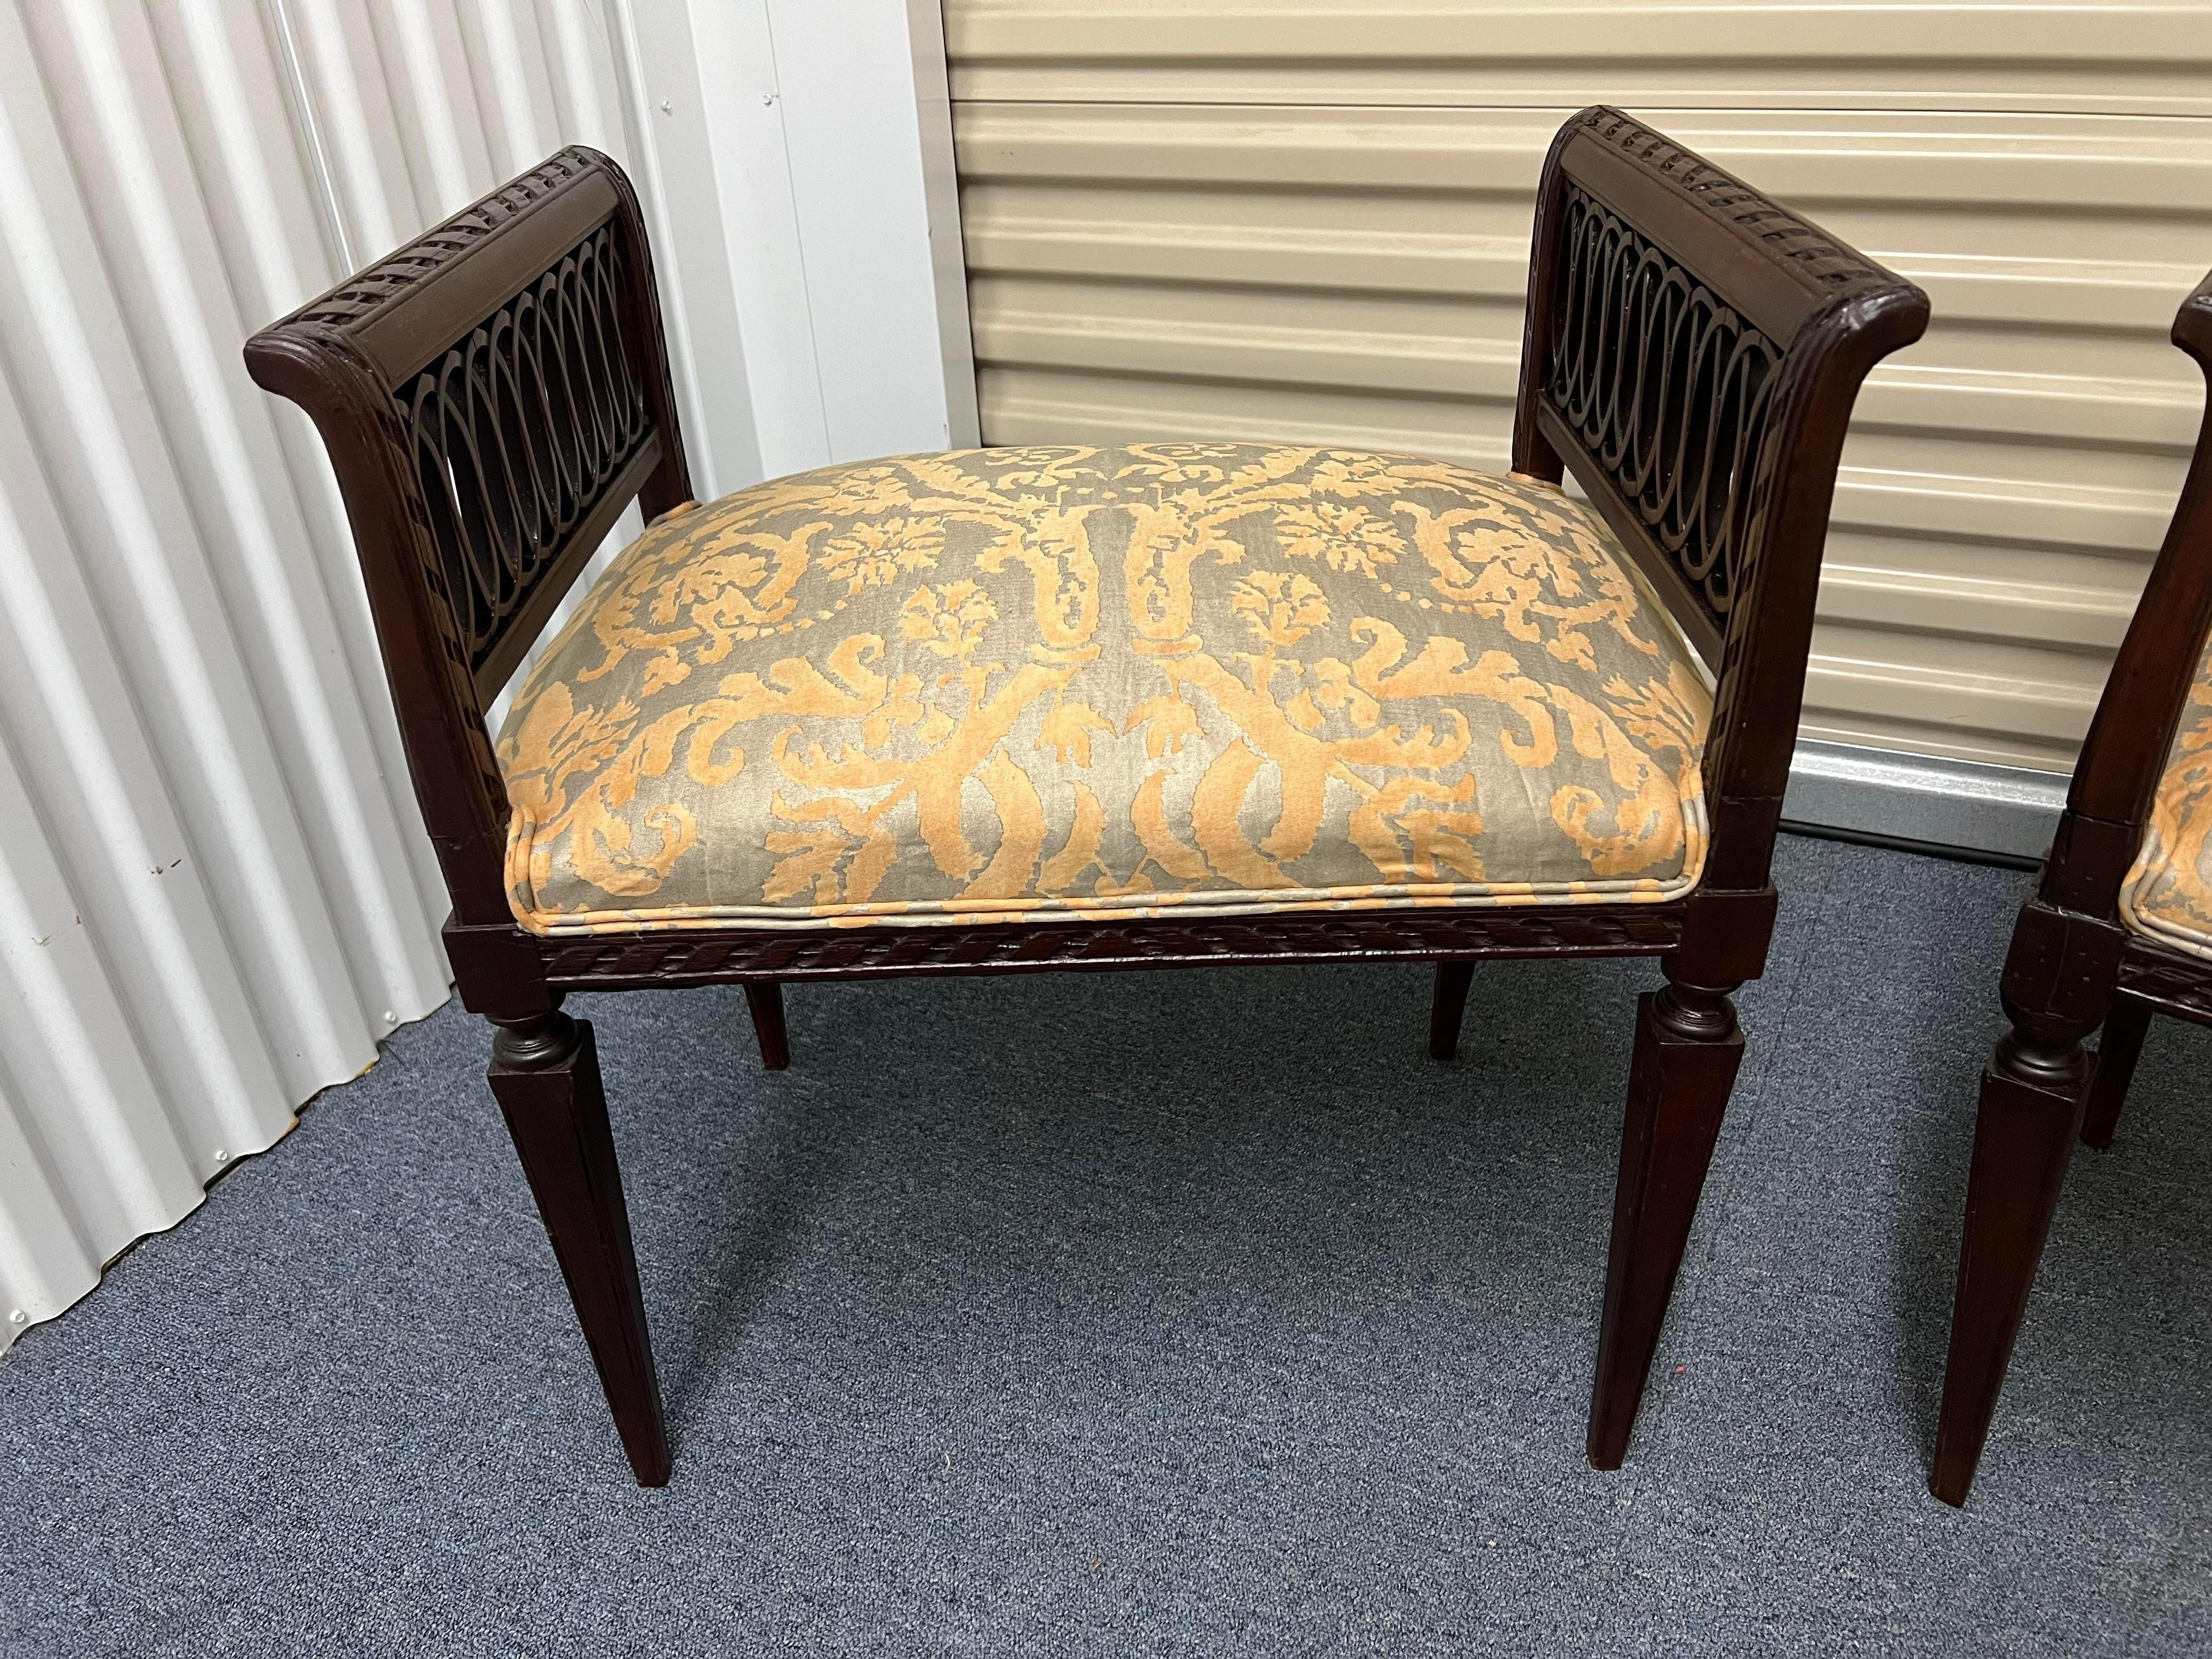 A pair of fine 19th century french louis xvi style stools or benches with authentic Fortuny fabric! Beautiful carvings to edges.

26” h x 23” w x 16.5” d x 21.5” (seat height)